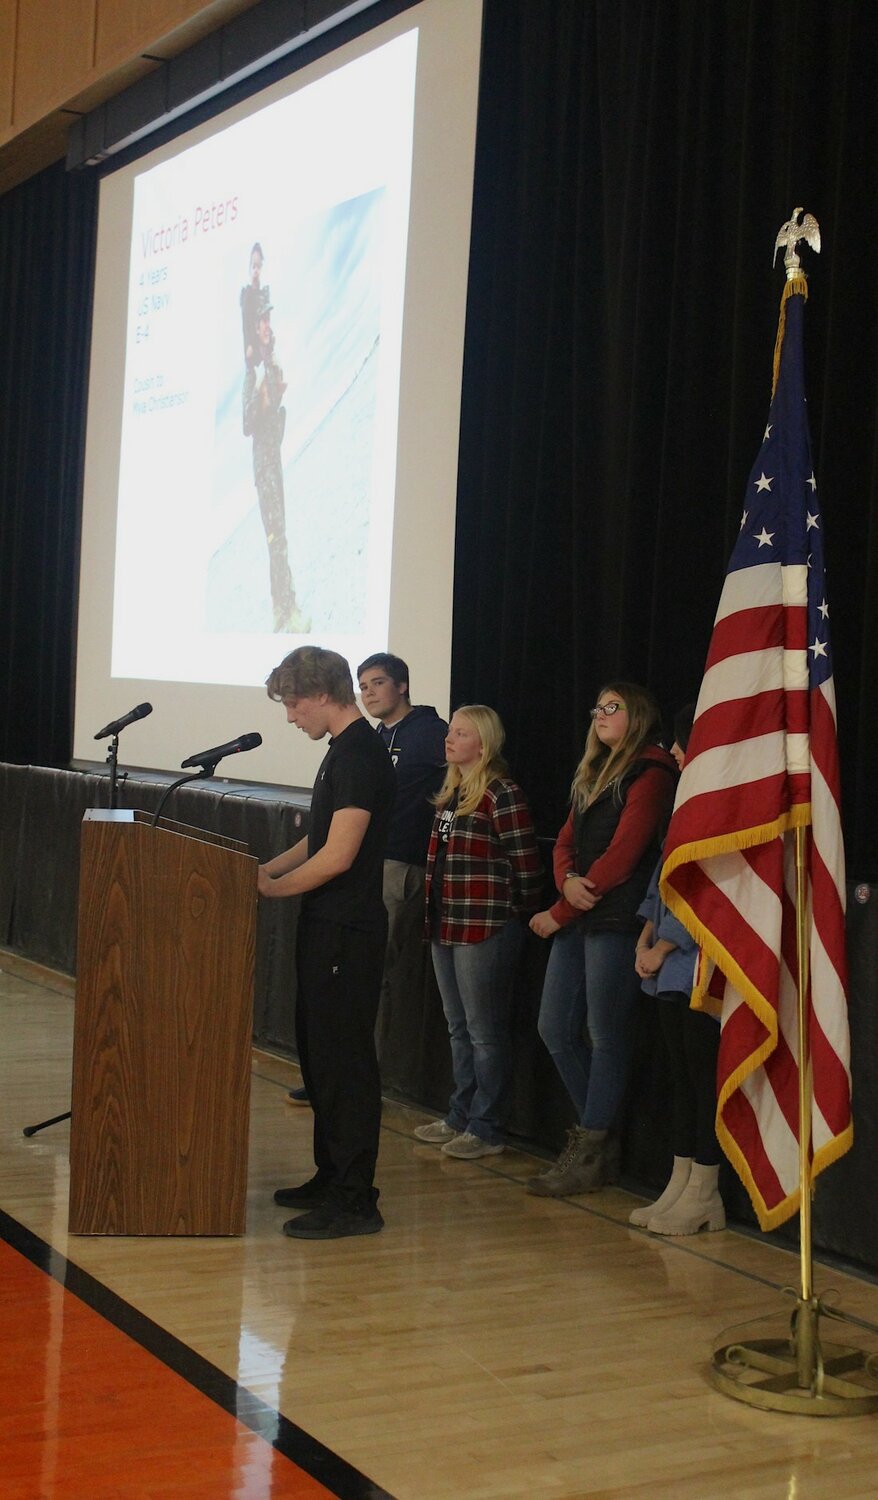 Blake Paul speaks about his time at Badger Boys State, a Legion sponsored event.